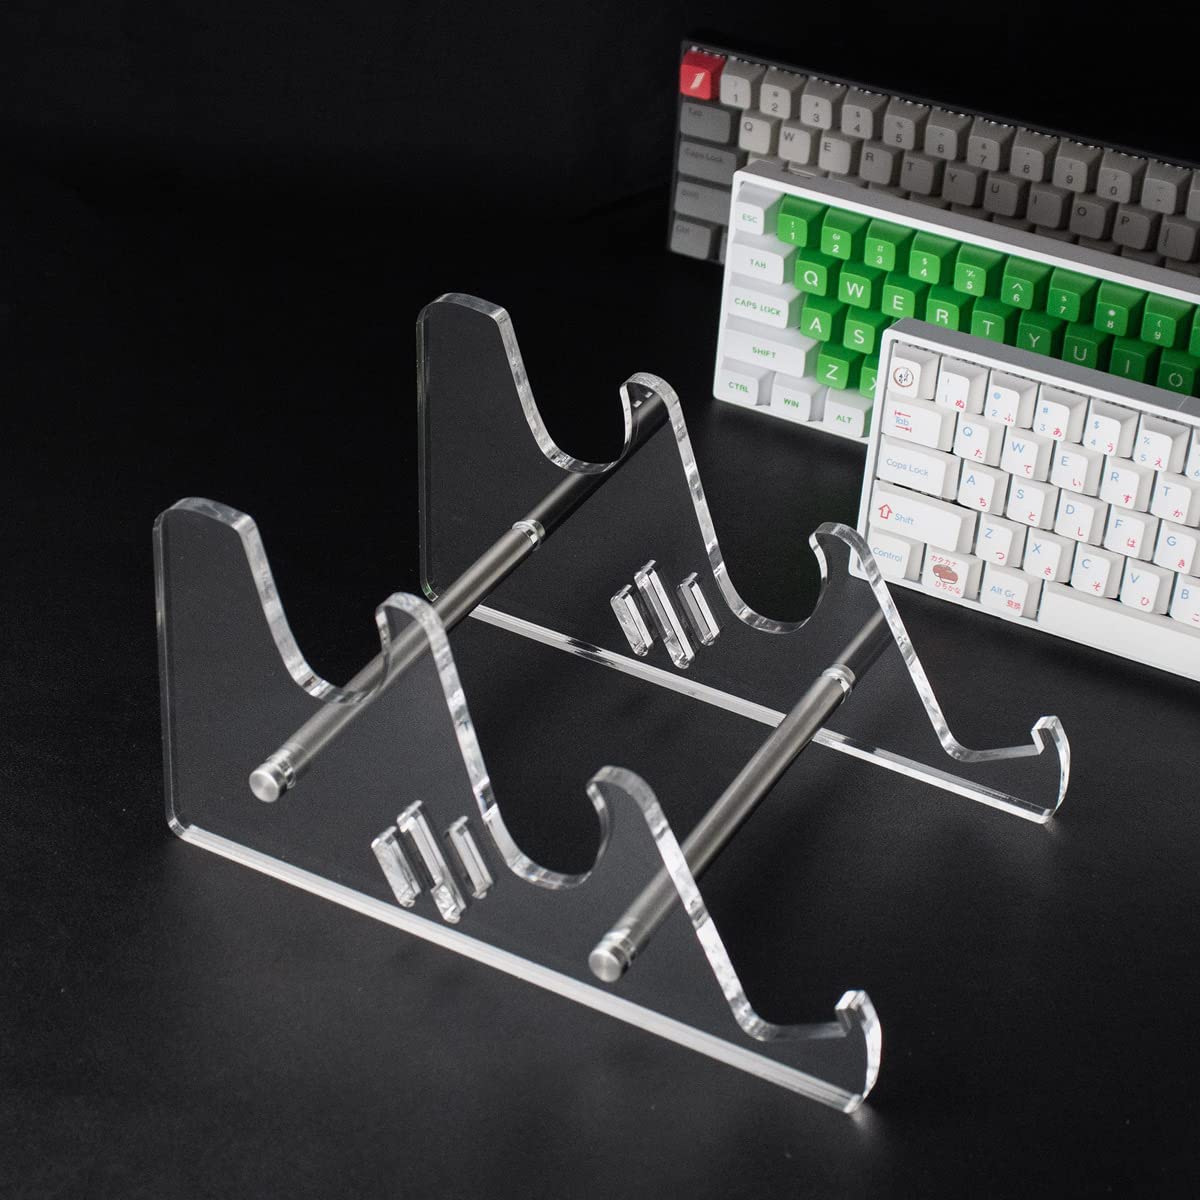 1pcs Acrylic Mechanical Keyboard Display Stand Clear 3-Tier Keyboards Storage Holder for Tablet Picture Frames